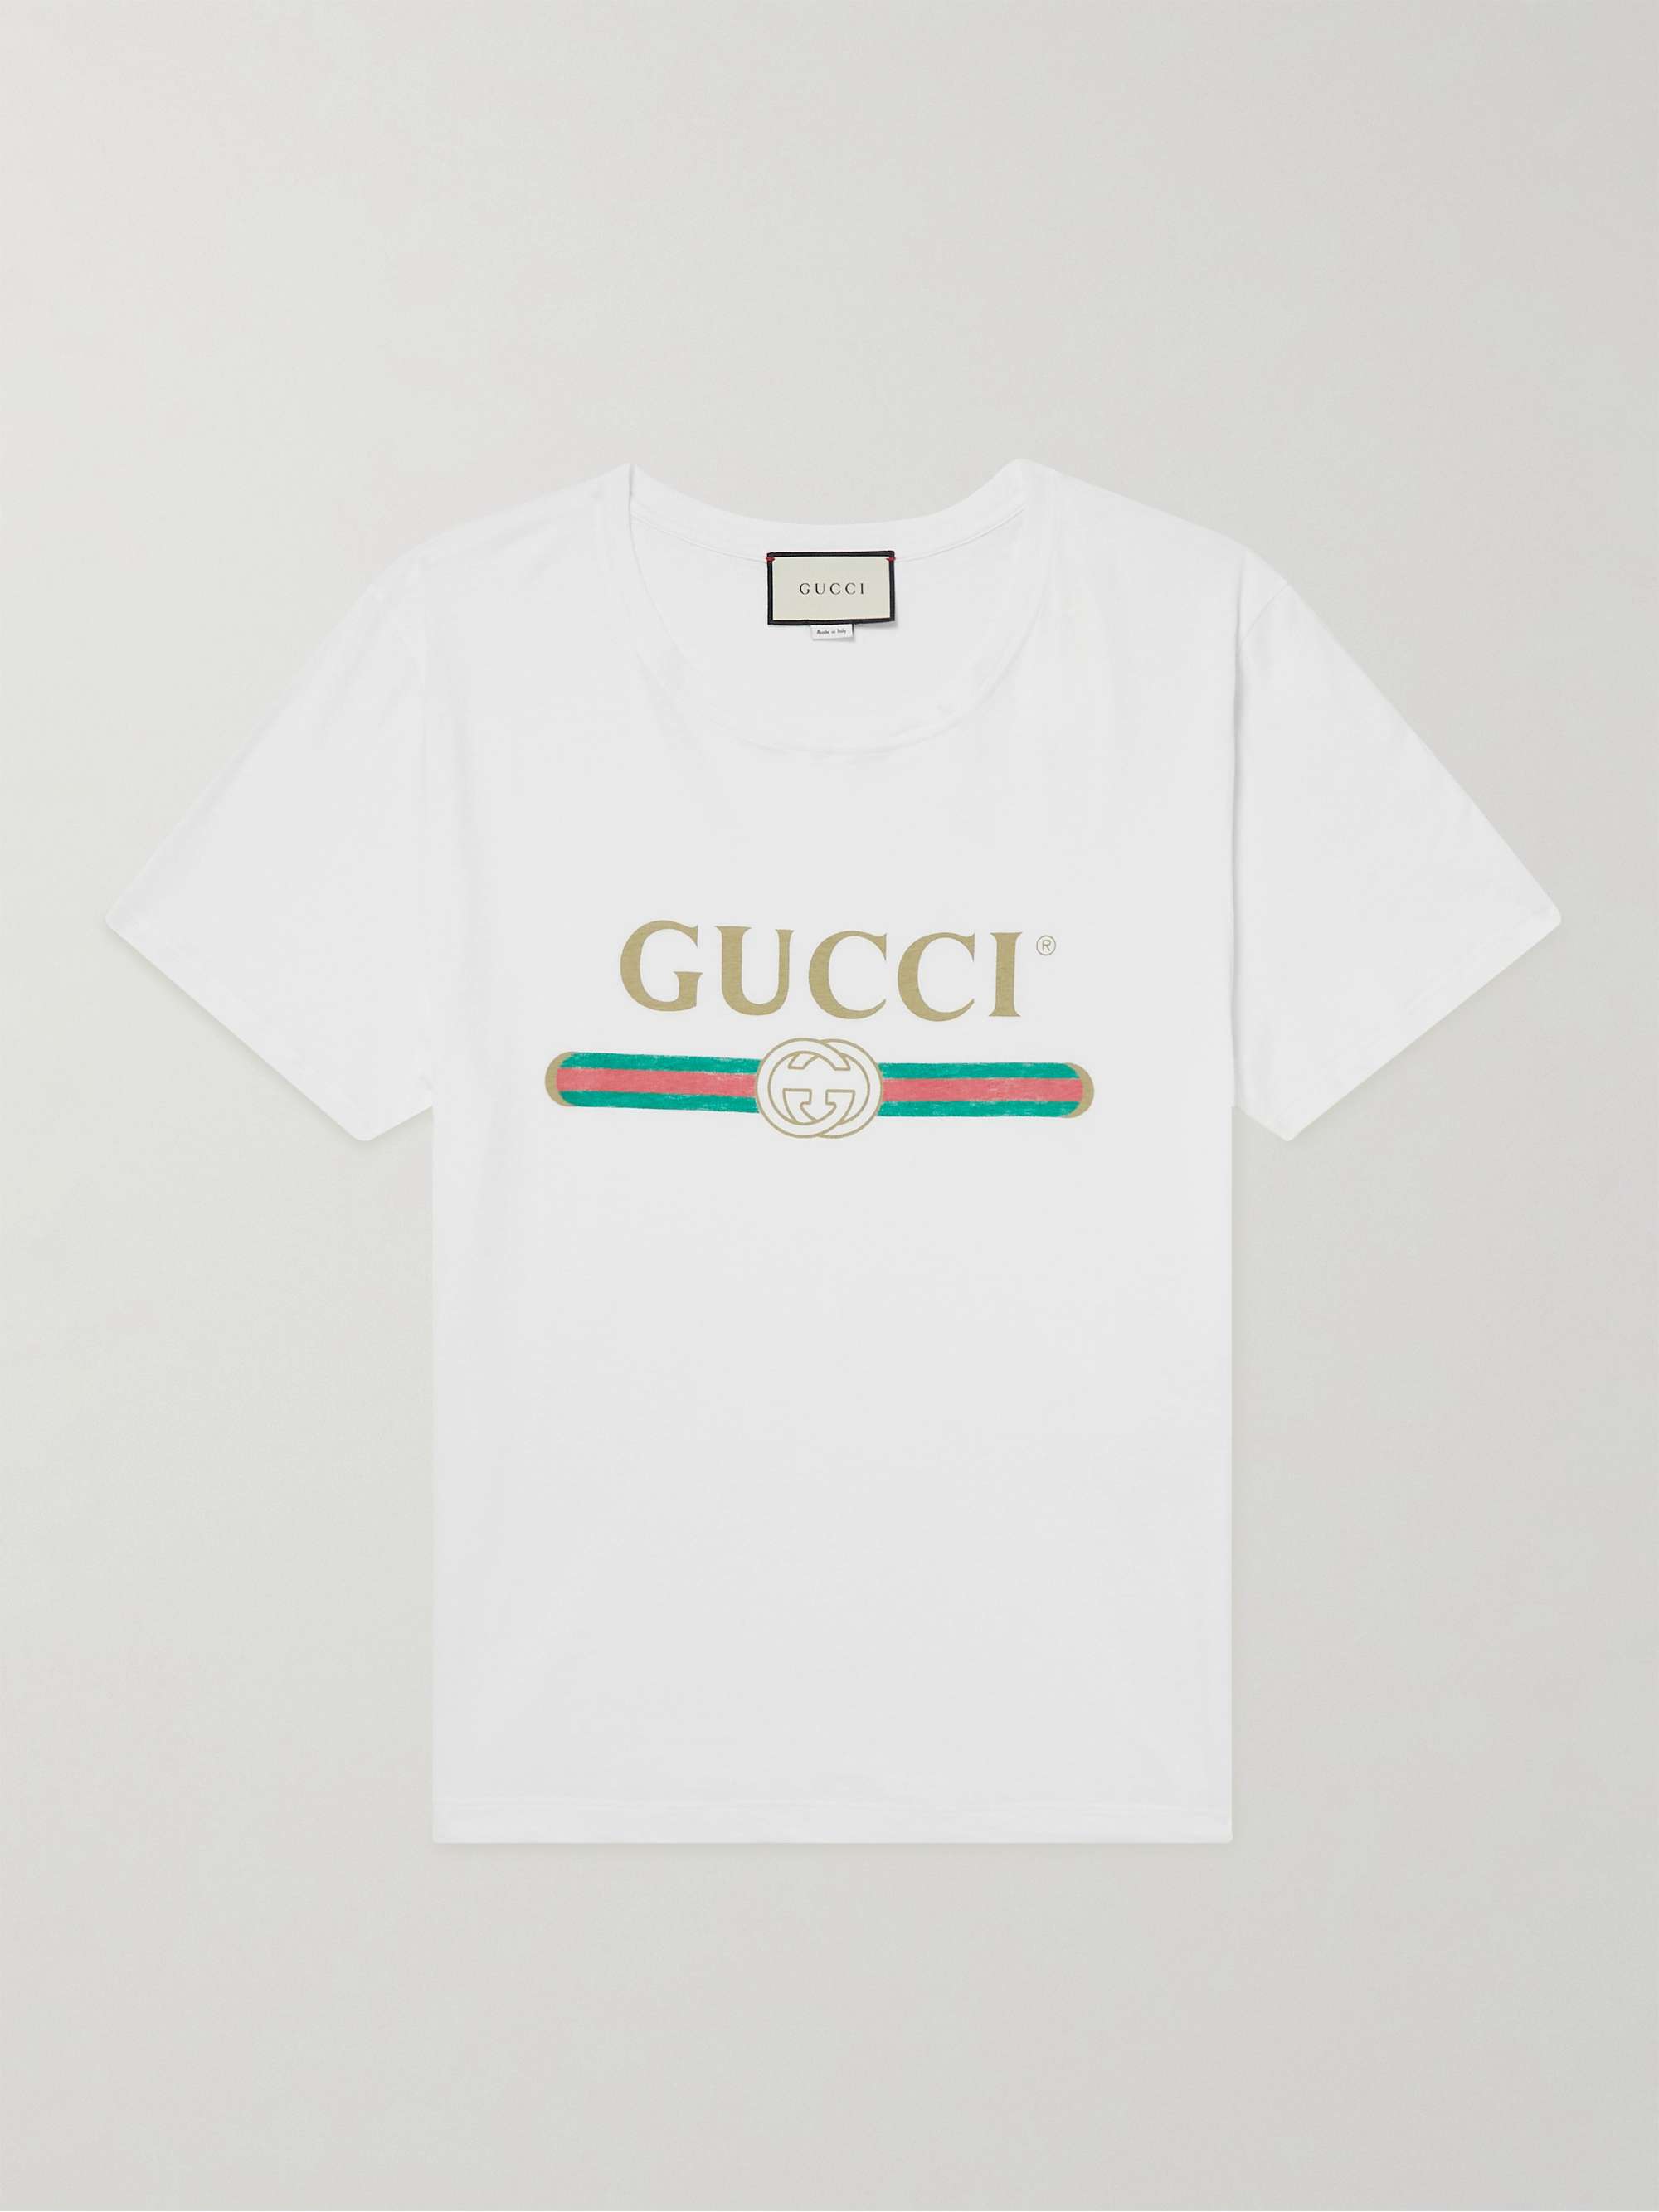 GUCCI Distressed Printed Cotton-Jersey T-Shirt | MR PORTER